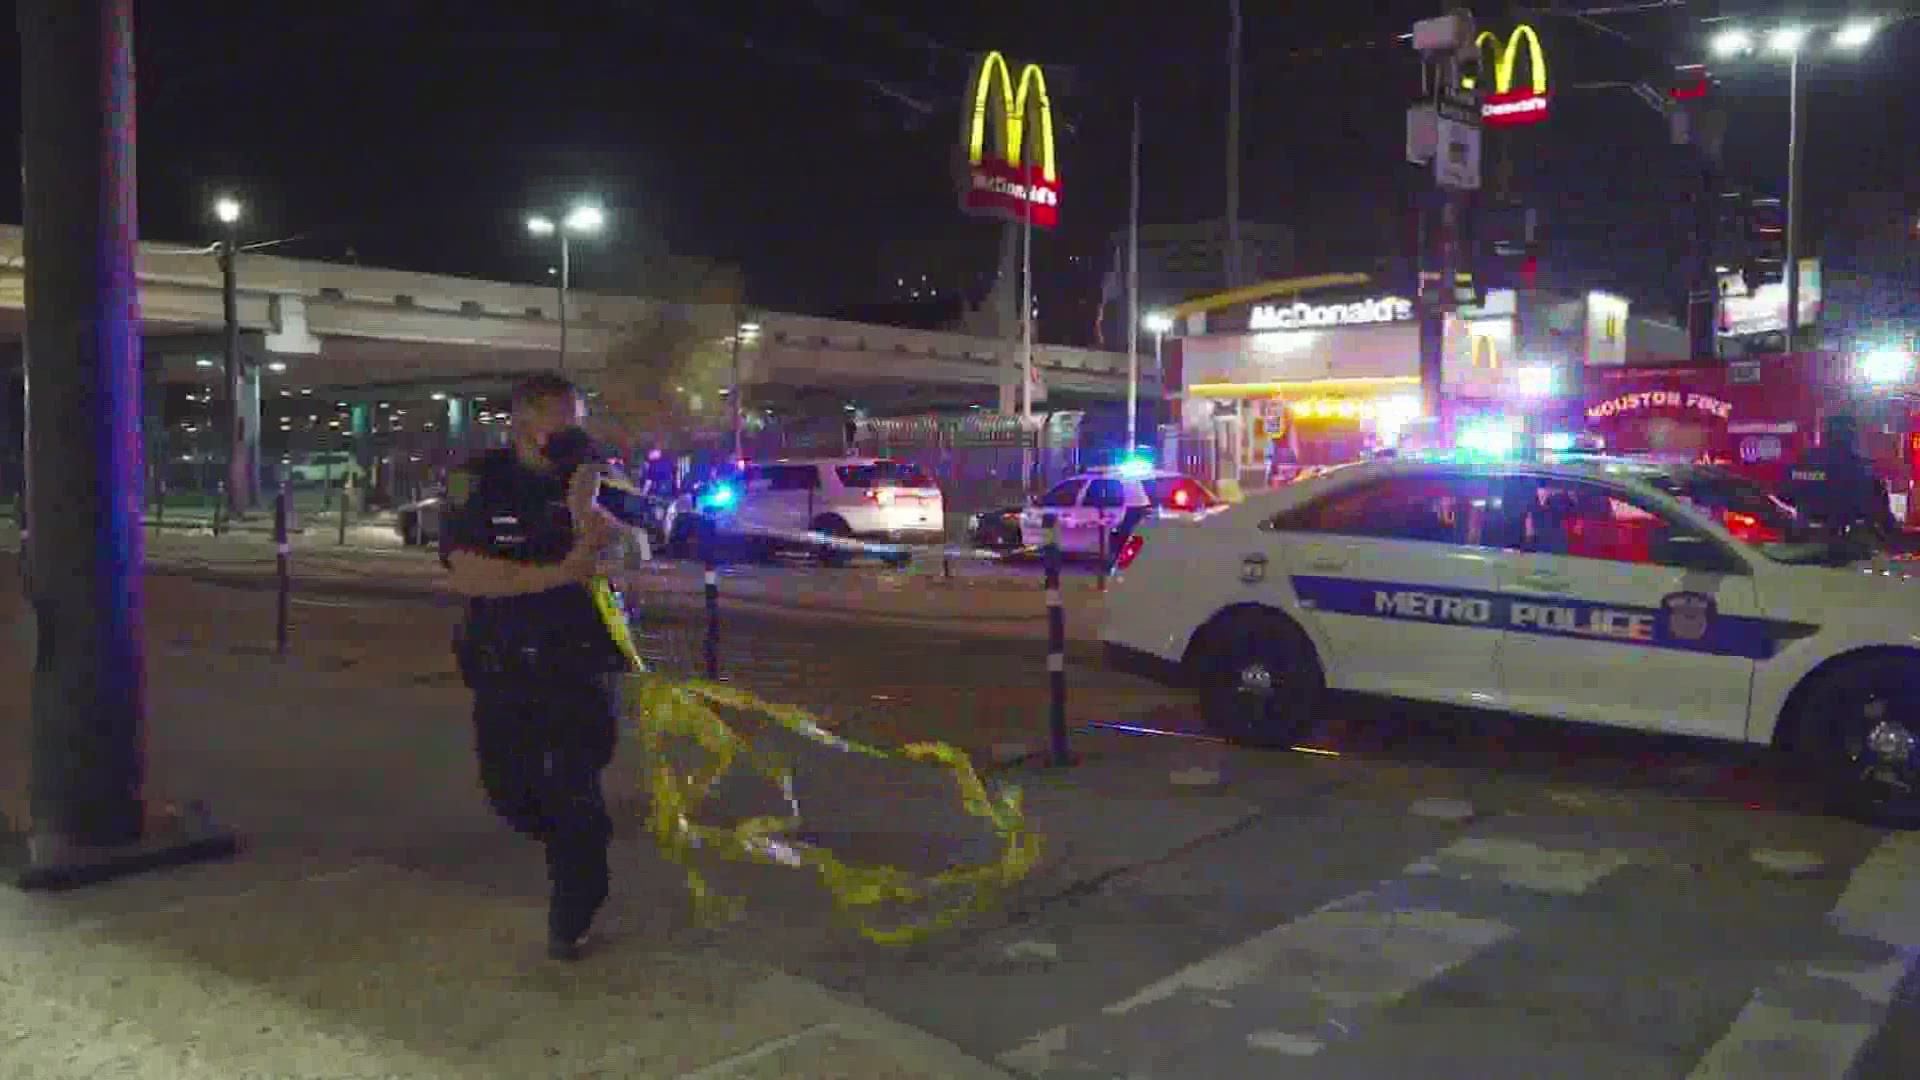 One person was killed and another was injured Friday in a parking lot shooting at a McDonald's in Midtown.